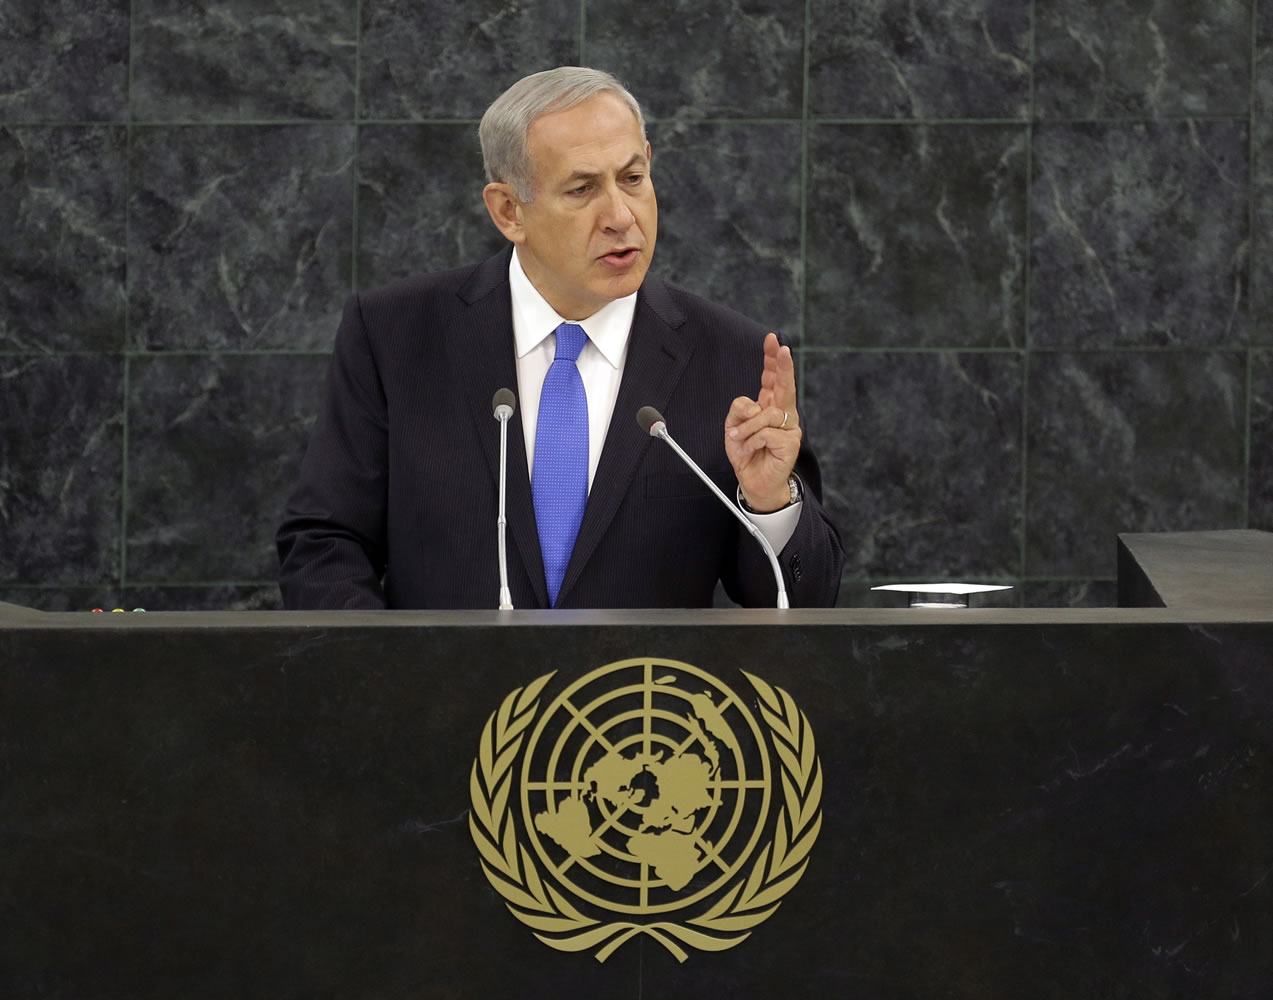 Israeli Prime Minister Benjamin Netanyahu speaks during the 68th session of the General Assembly at United Nations headquarters on Tuesday at U.N.